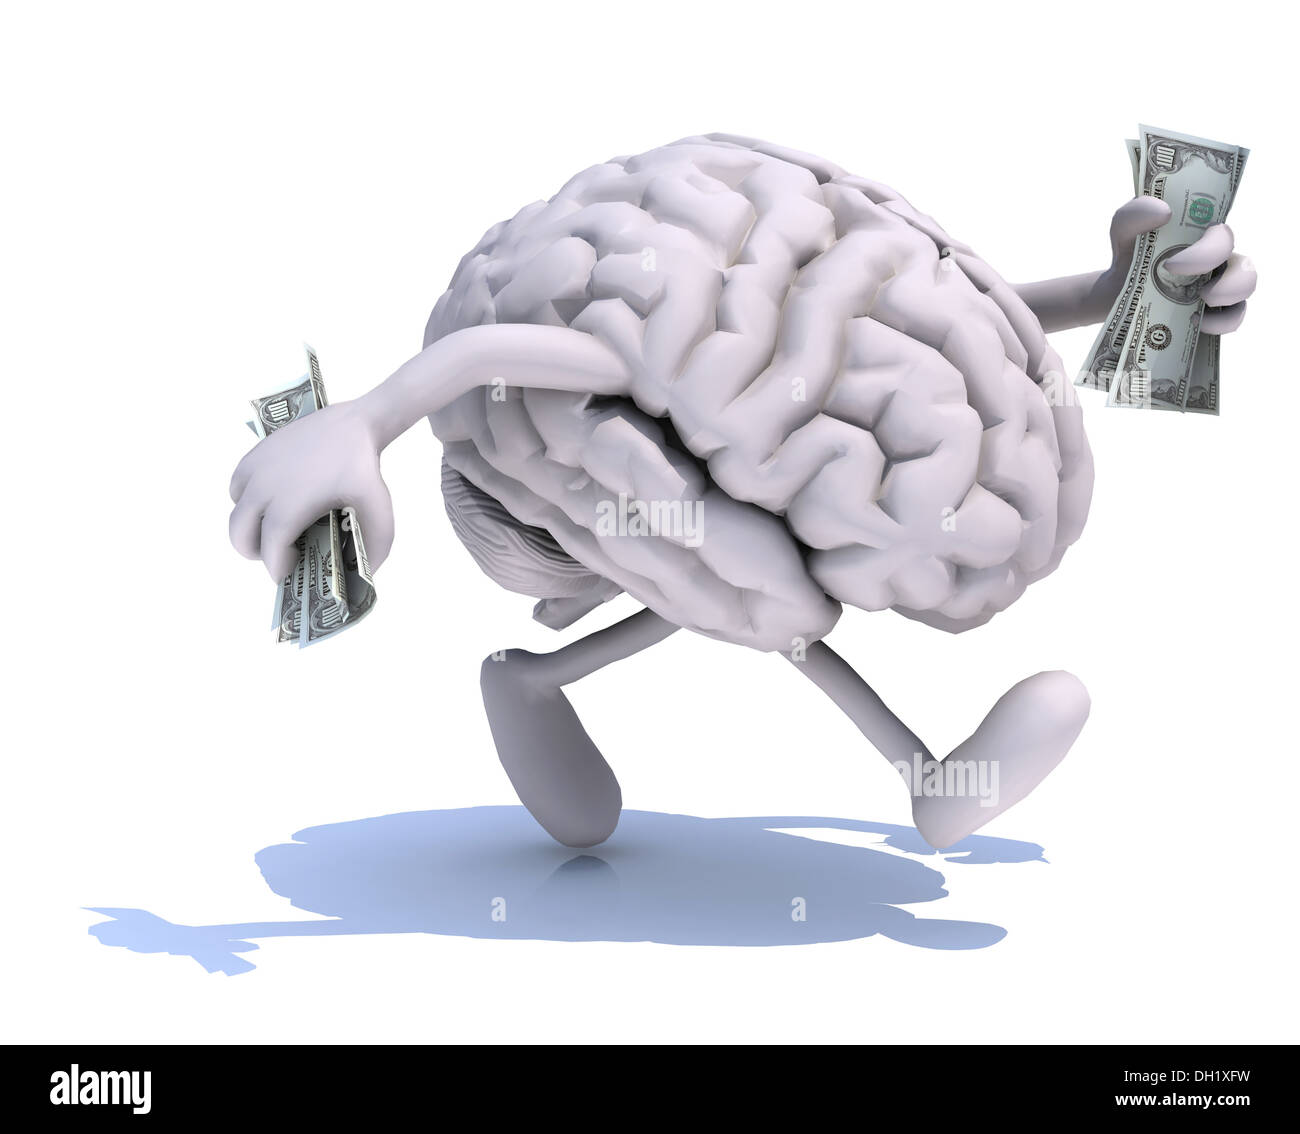 human brain with arms and legs run away with dollar notes on hands, 3d illustration Stock Photo